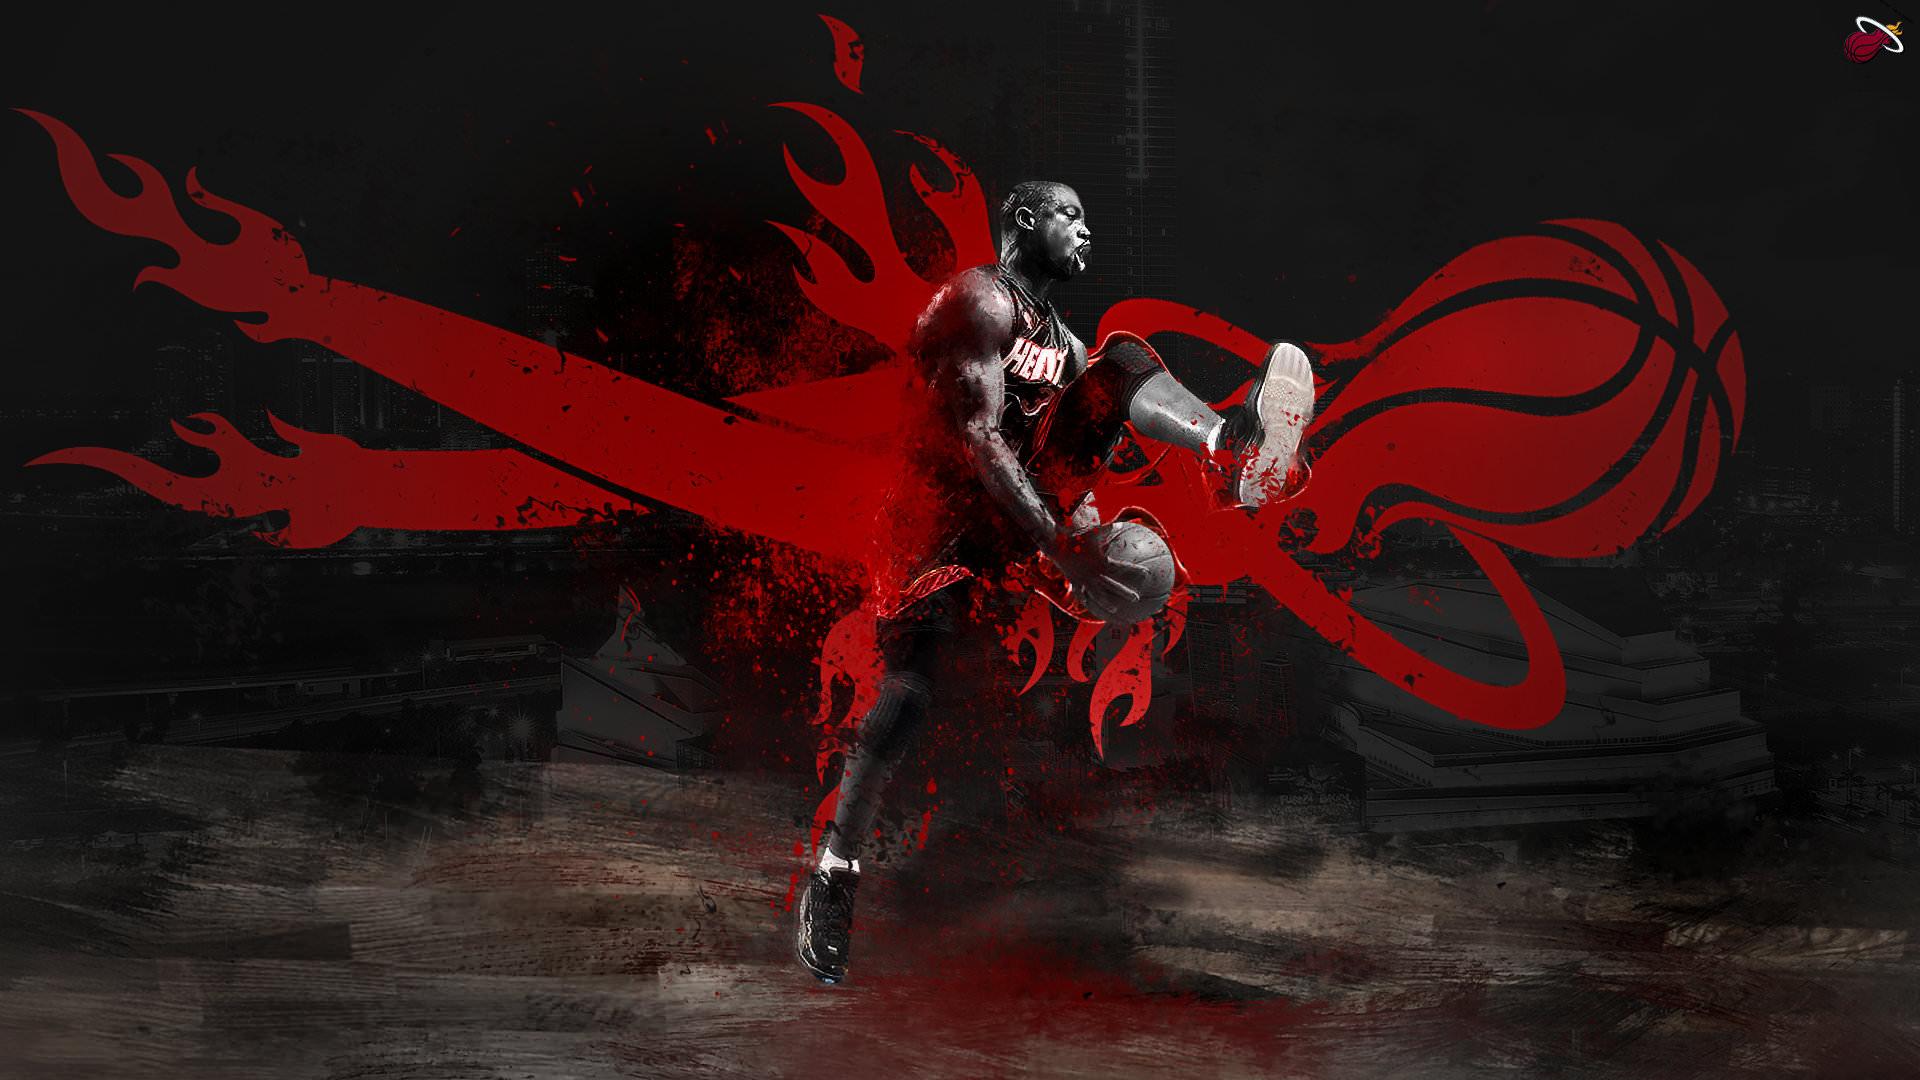 Free download Miami Heat background HD 1080p for PC